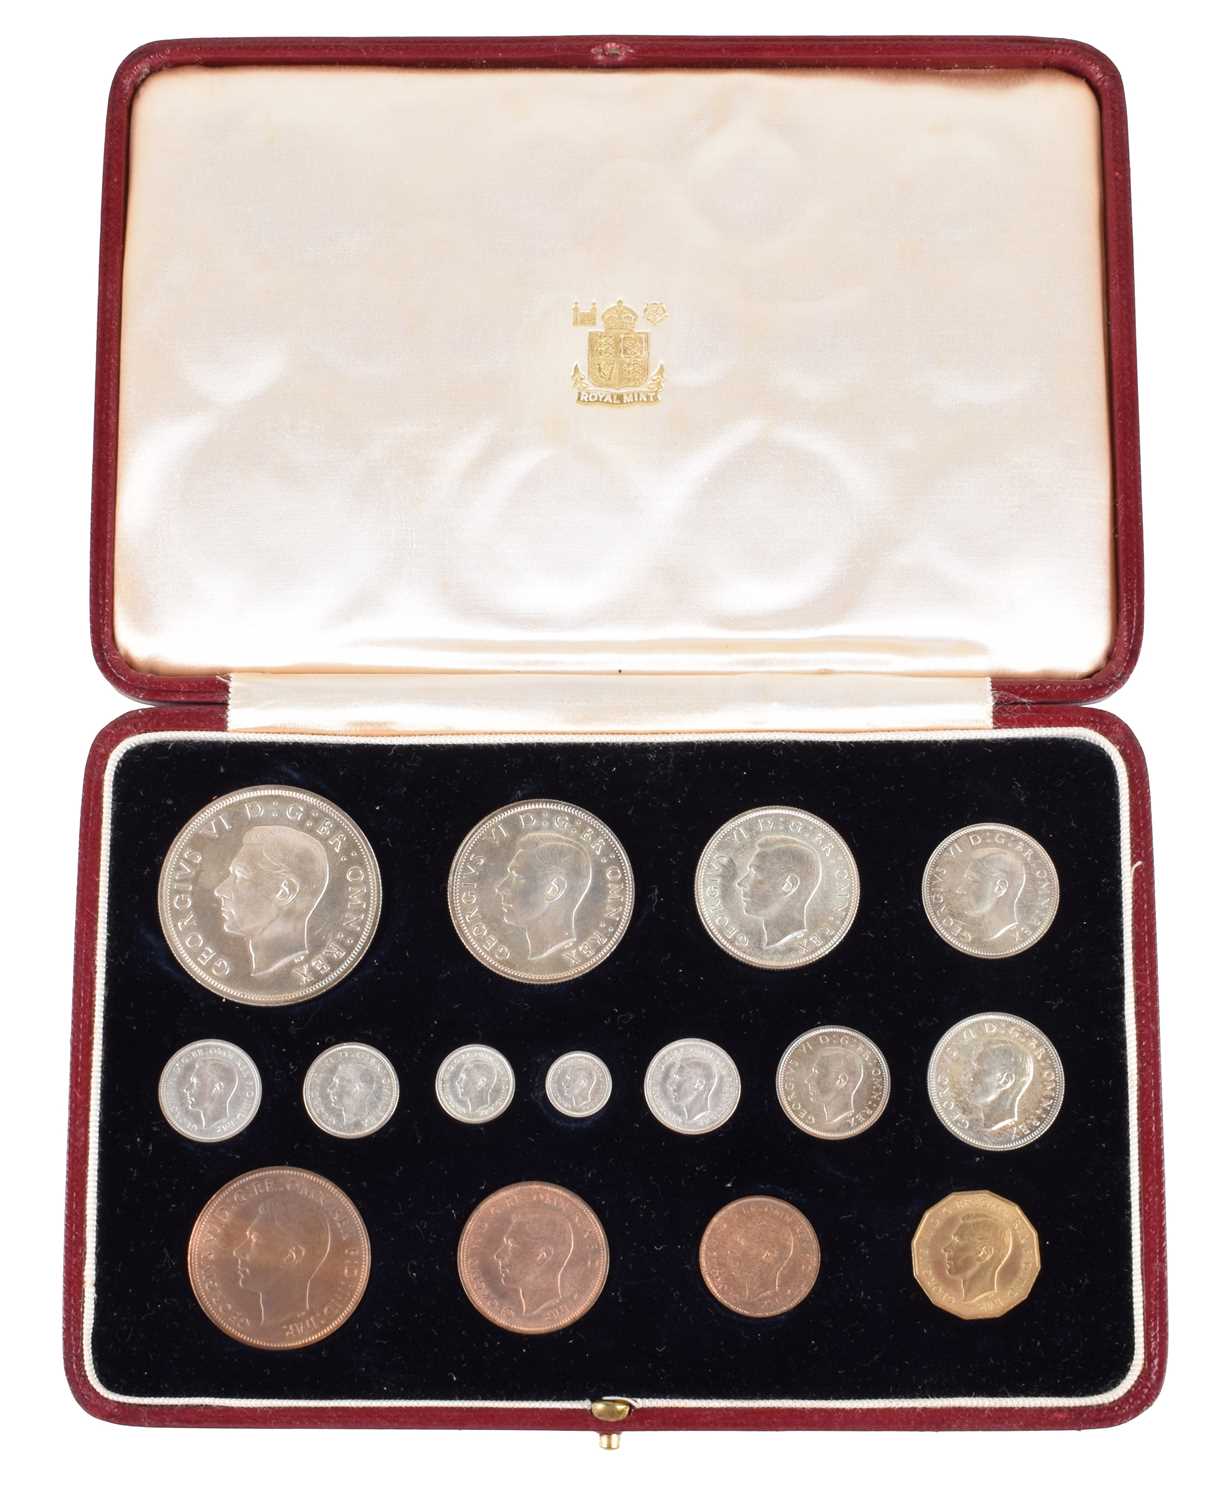 A Royal Mint George VI 1937 Coronation Specimen Proof Coin set, in original case of issue.